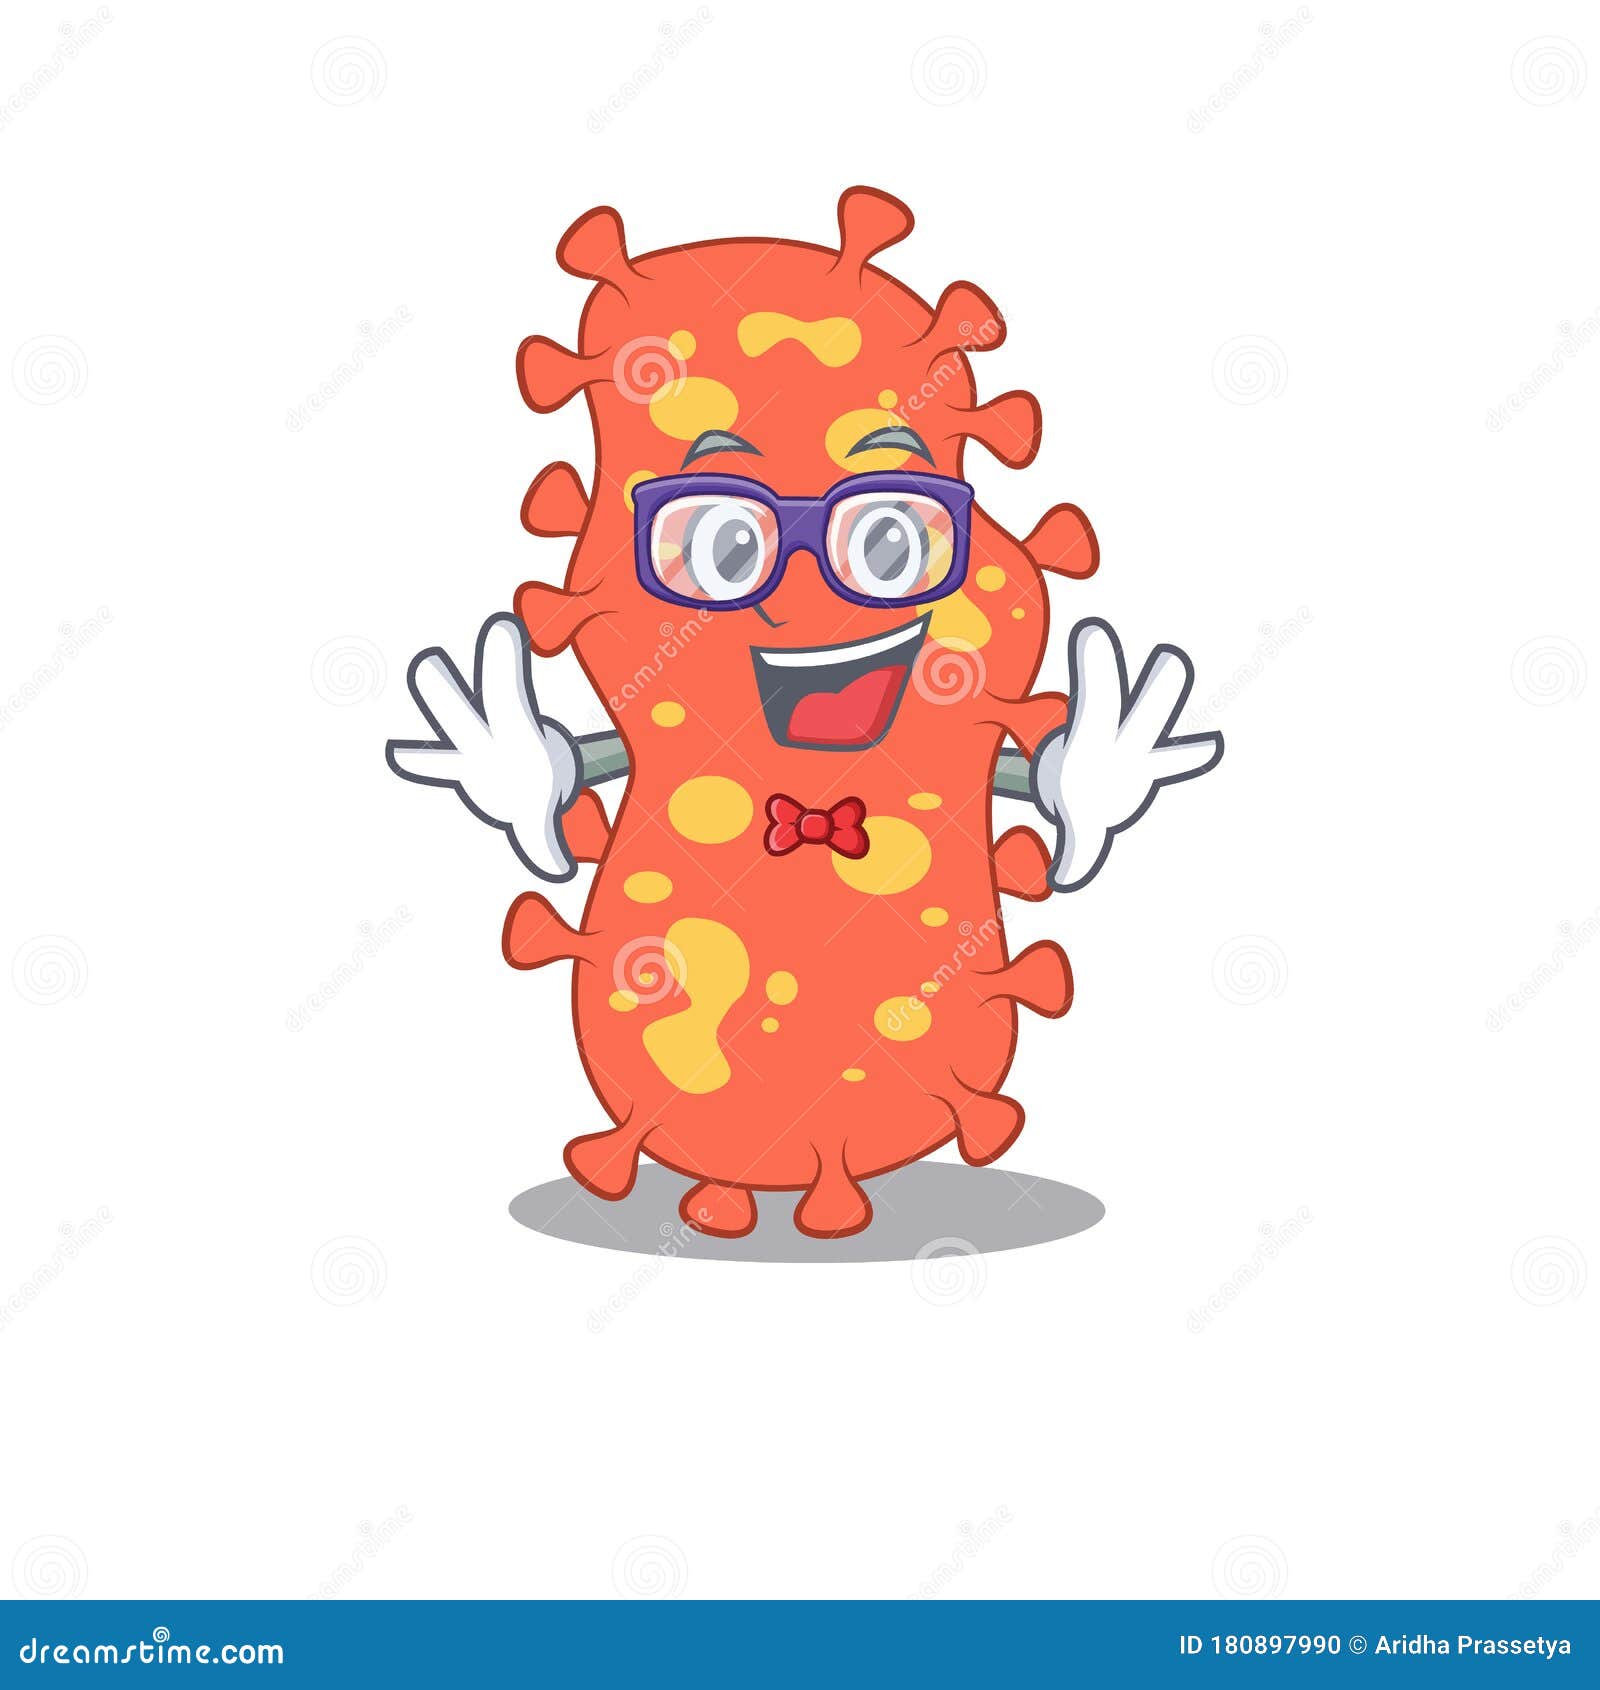 mascot  style of geek bacteroides with glasses